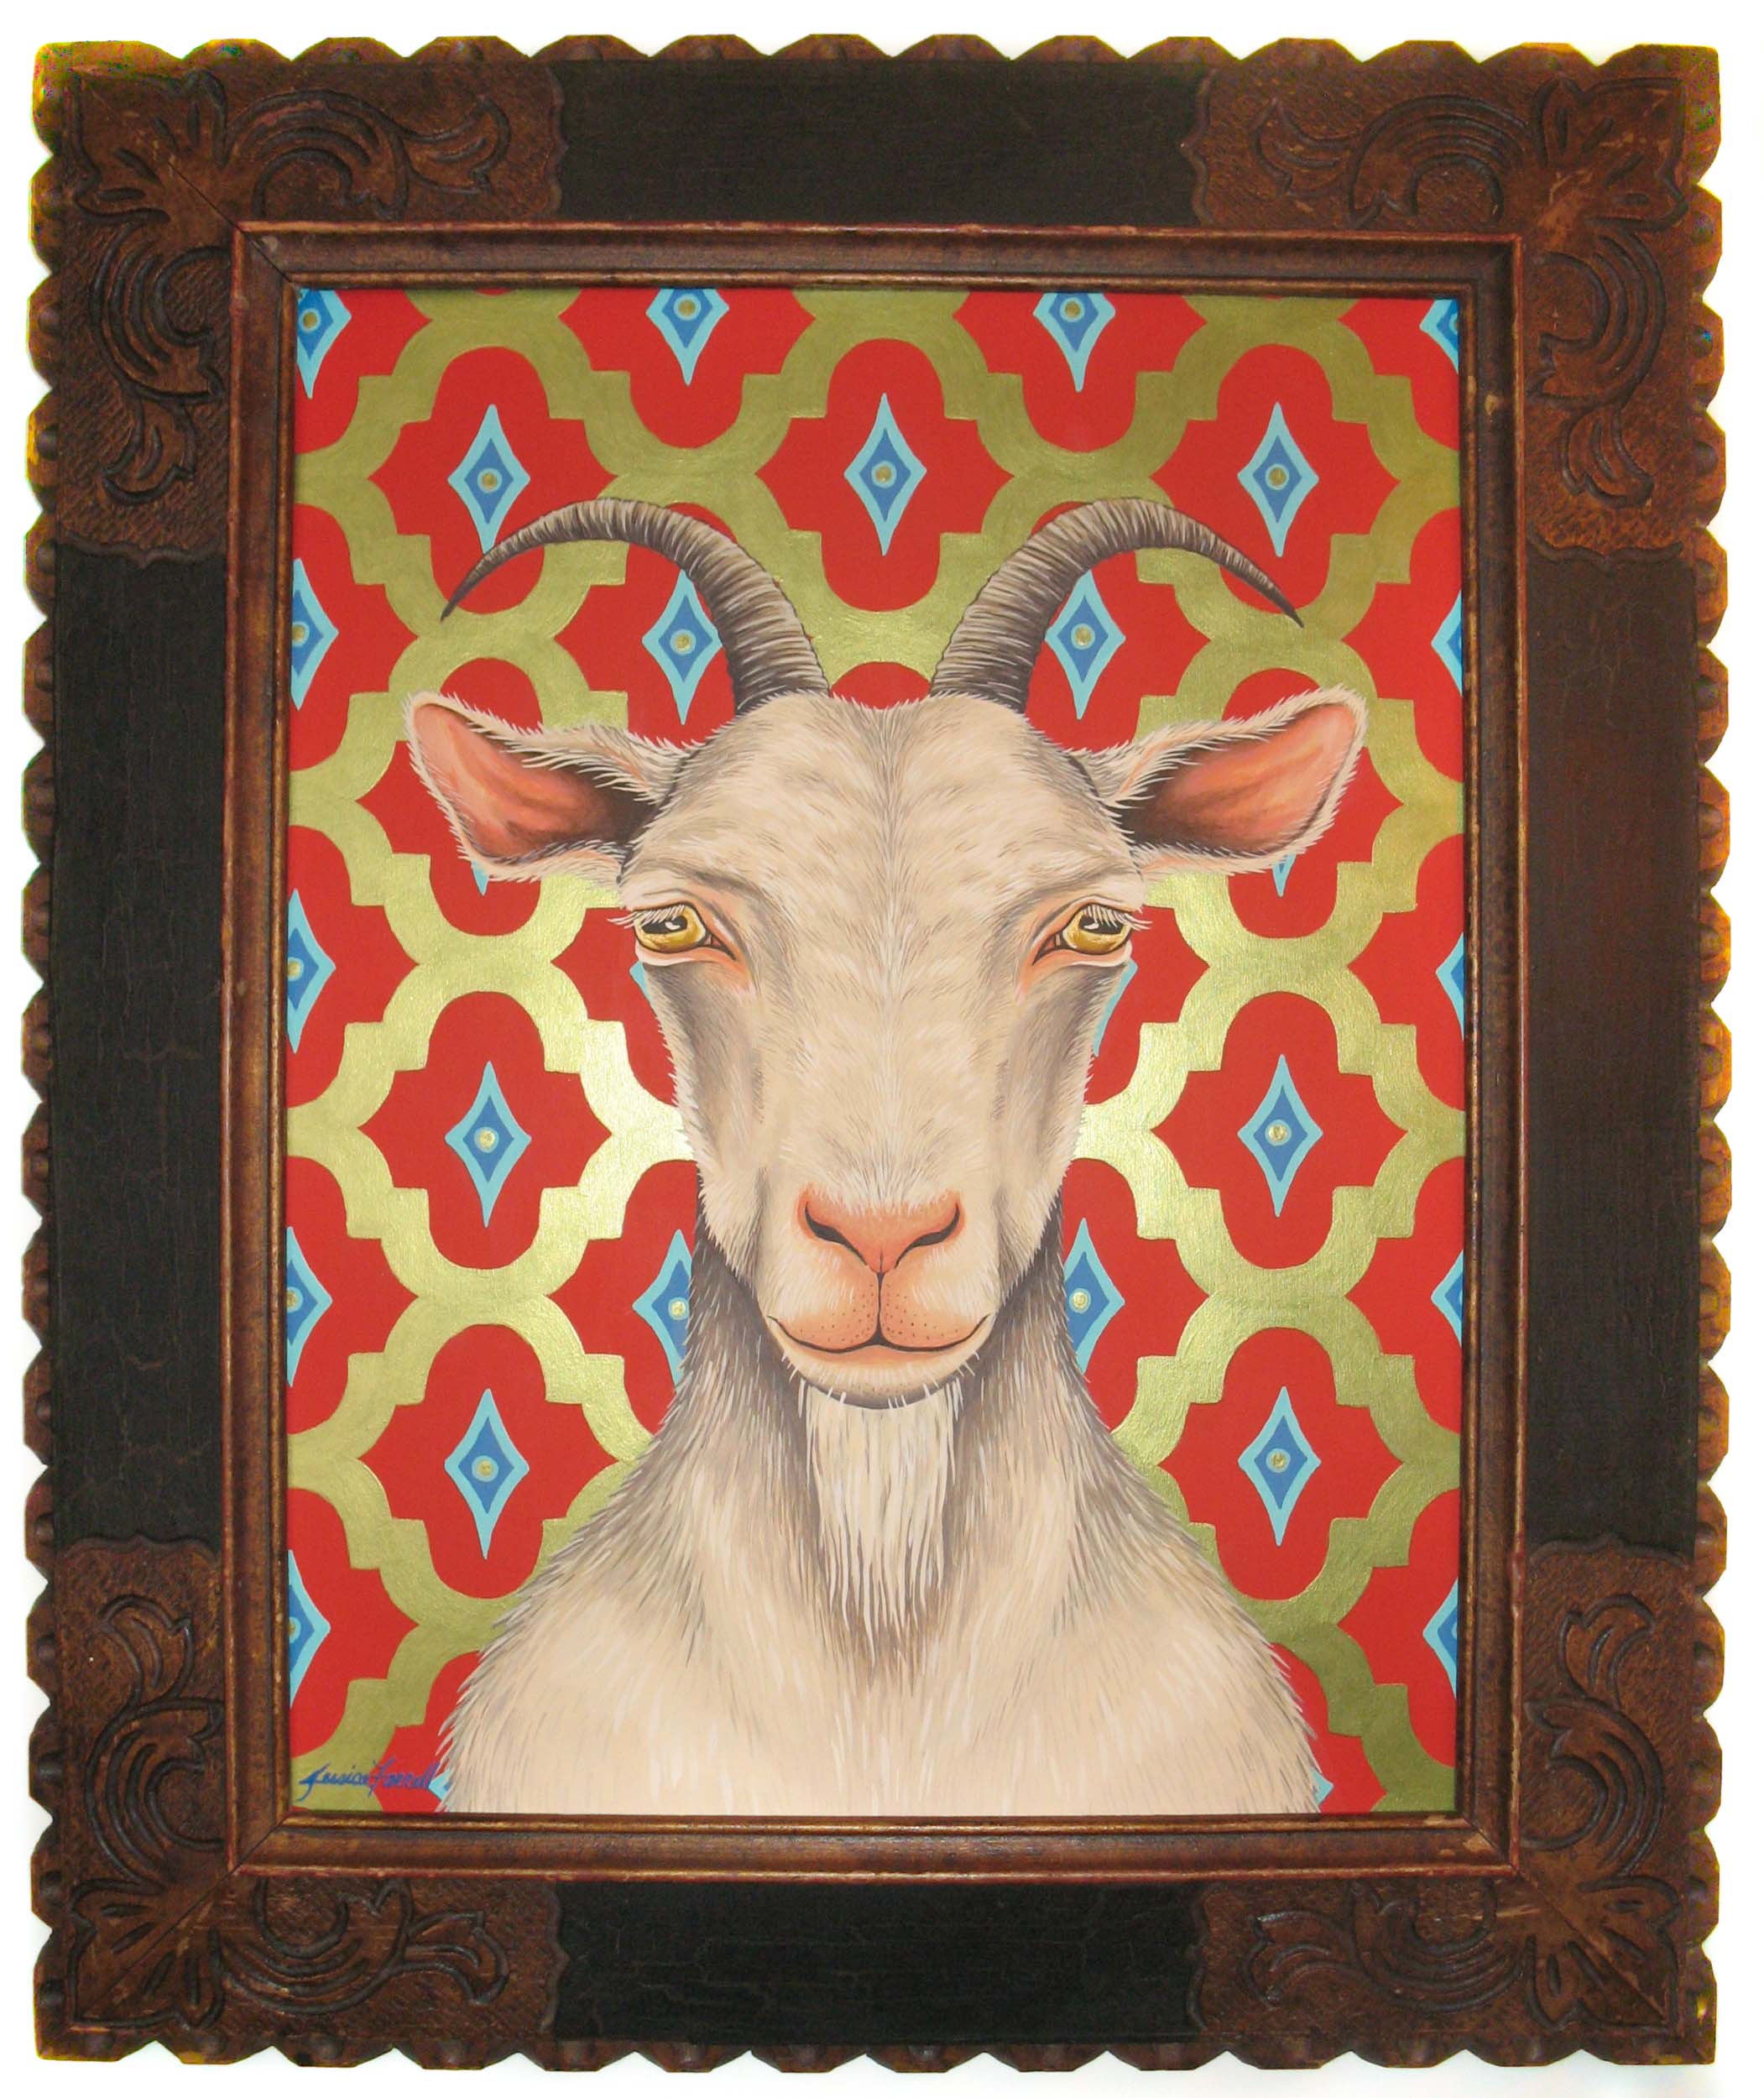   Goat 1,  Acrylic on wood with vintage frame, 24 x 20 inches (framed)  (private collection) 